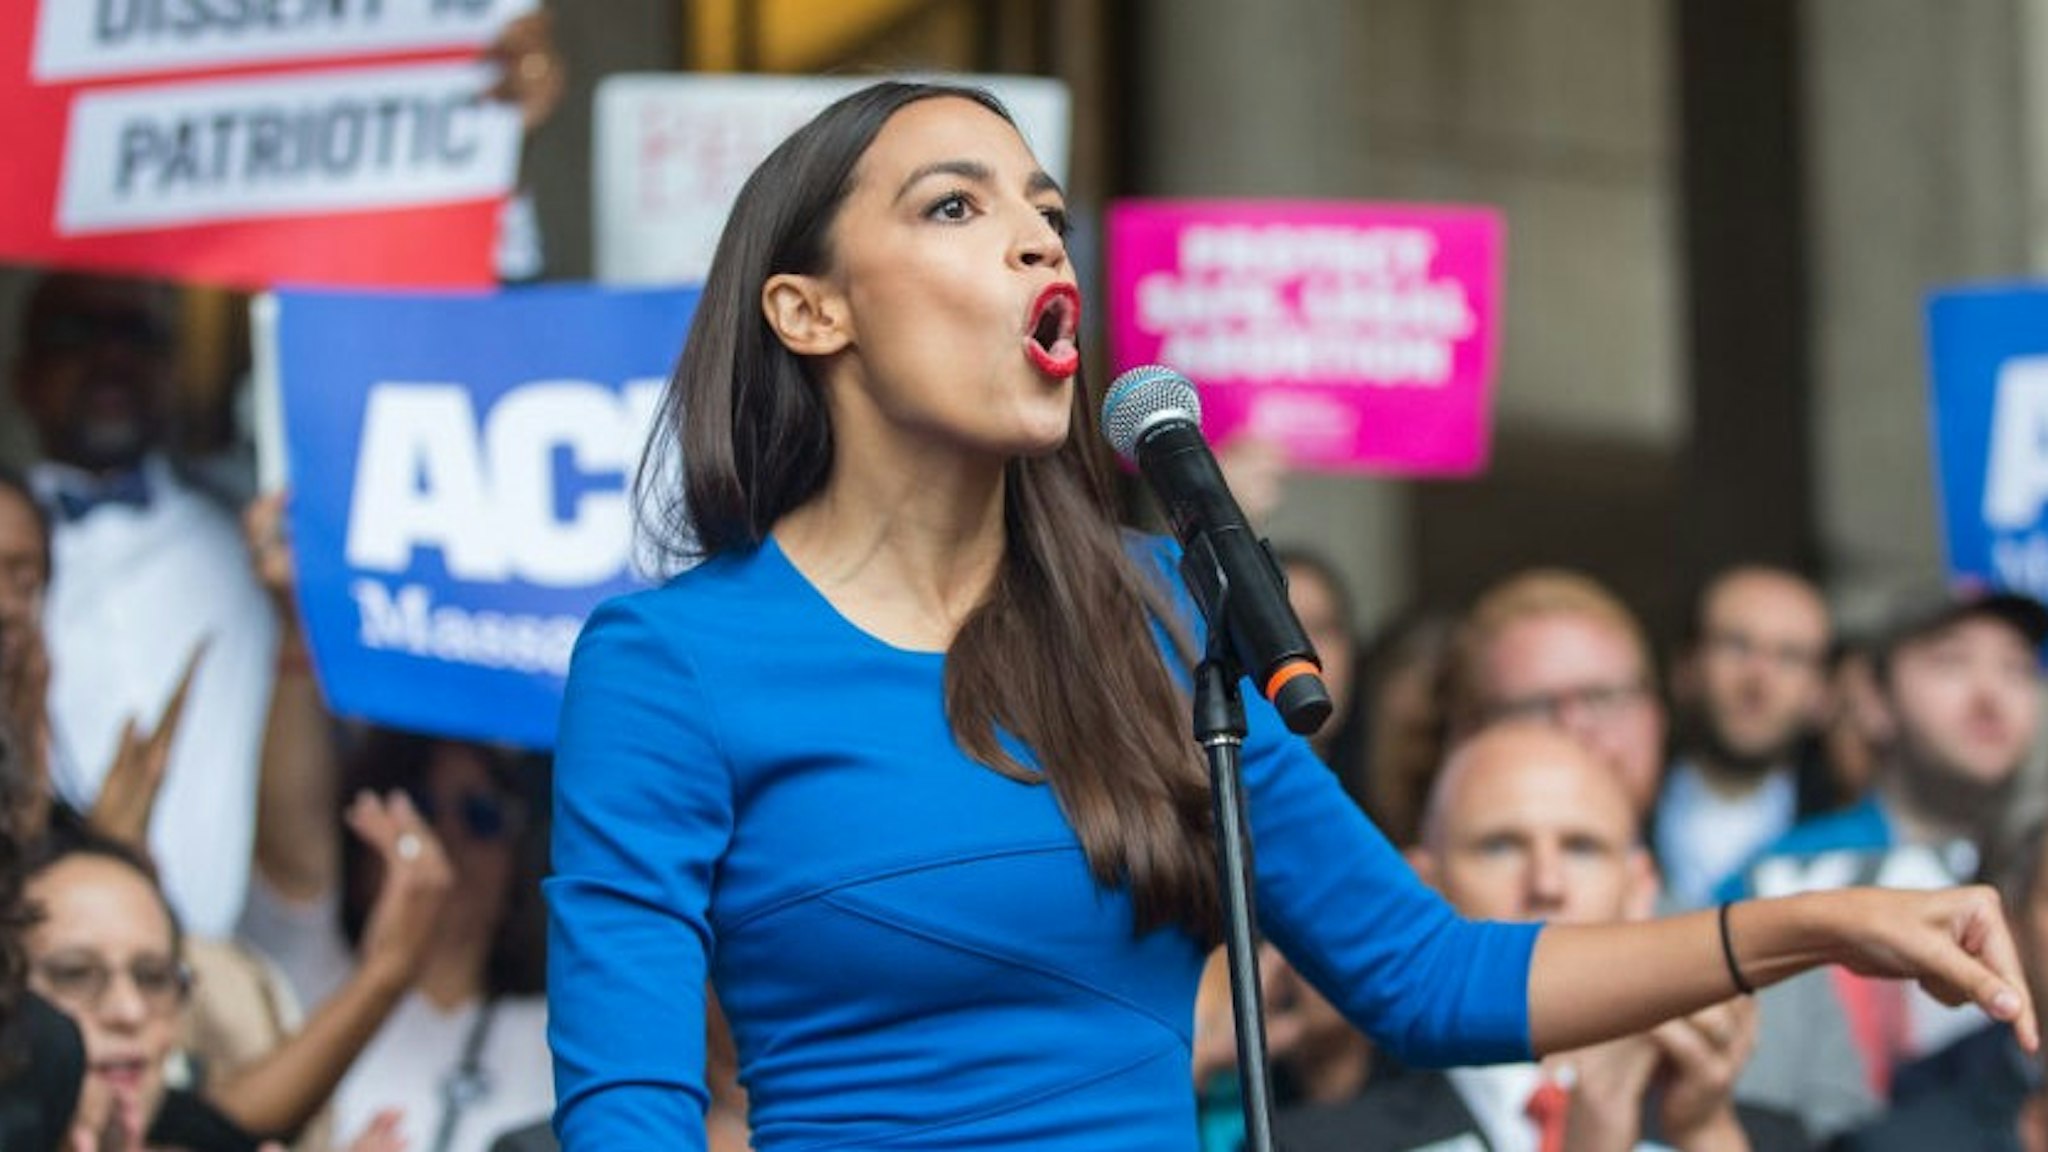 BOSTON, MA - OCTOBER 01: New York Congressional candidate Alexandria Ocasio-Cortez speaks at a rally calling on Sen. Jeff Flake (R-AZ) to reject Judge Brett Kavanaugh's nomination to the Supreme Court on October 1, 2018 in Boston, Massachusetts. Sen. Flake is scheduled to give a talk at the Forbes 30 under 30 event in Boston after recently calling for a one week pause in the confirmation process to give the FBI more time to investigate sexual assault allegations. (Photo by